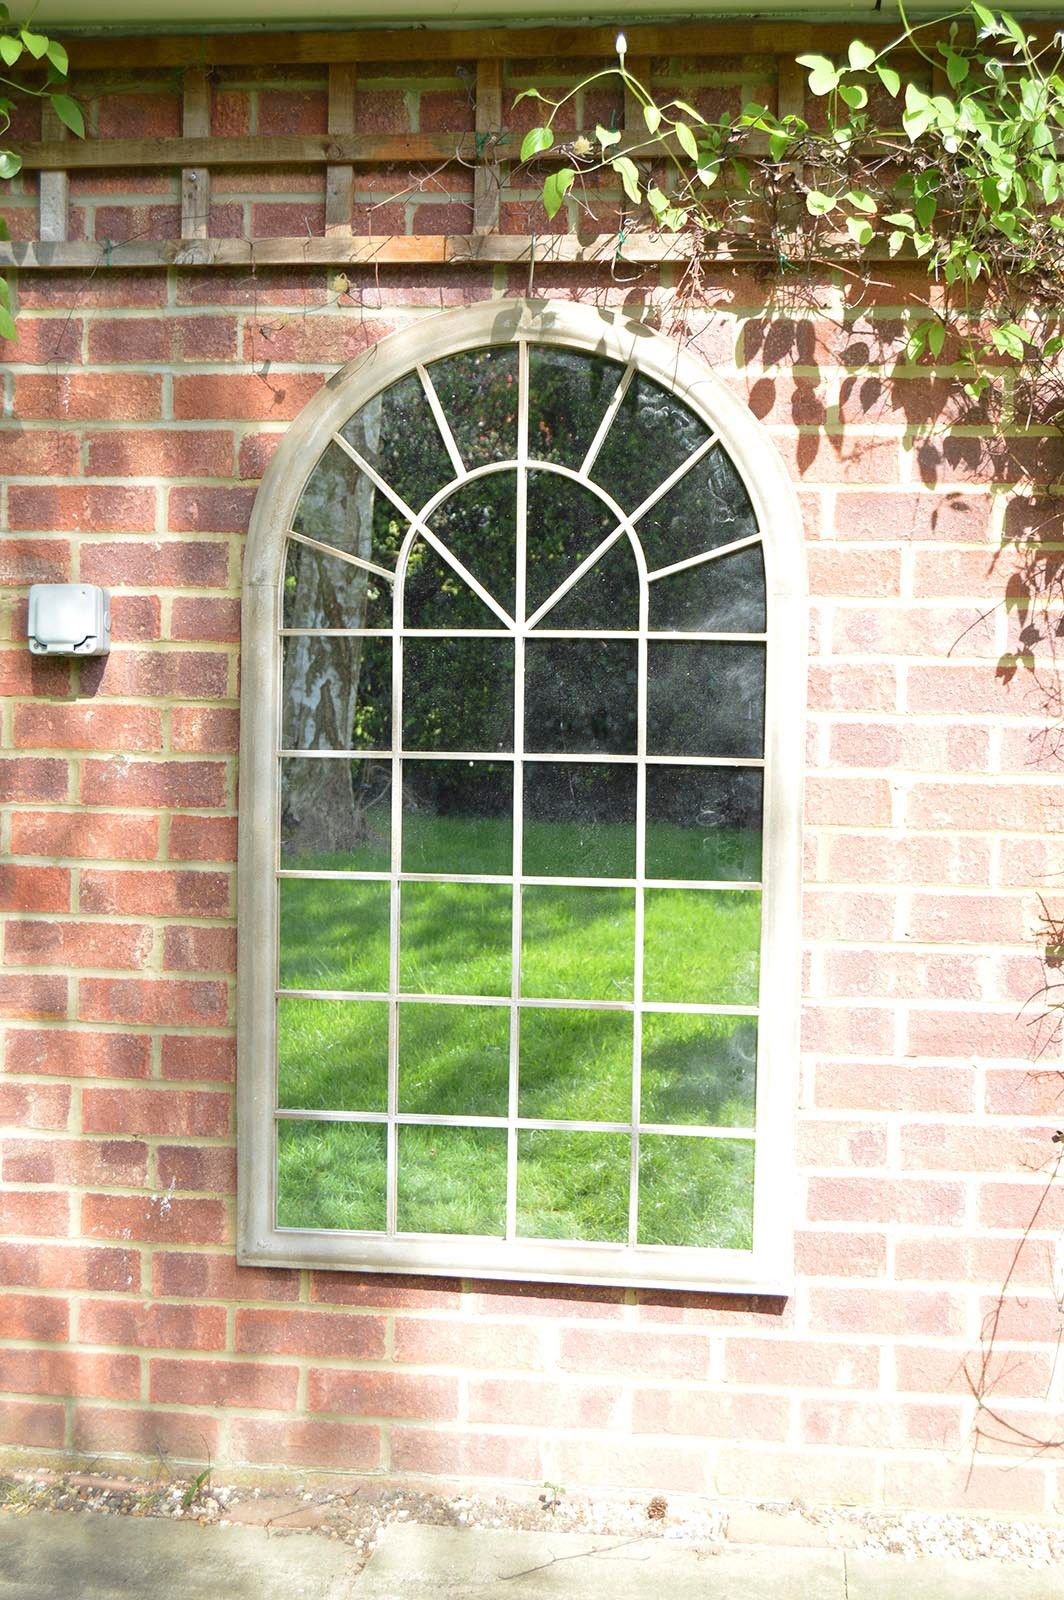 Honiton Ivory Cream Victorian Indoor Outdoor Garden Wall Mirror 130X76 Cm With Regard To Window Cream Wood Wall Mirrors (View 20 of 20)